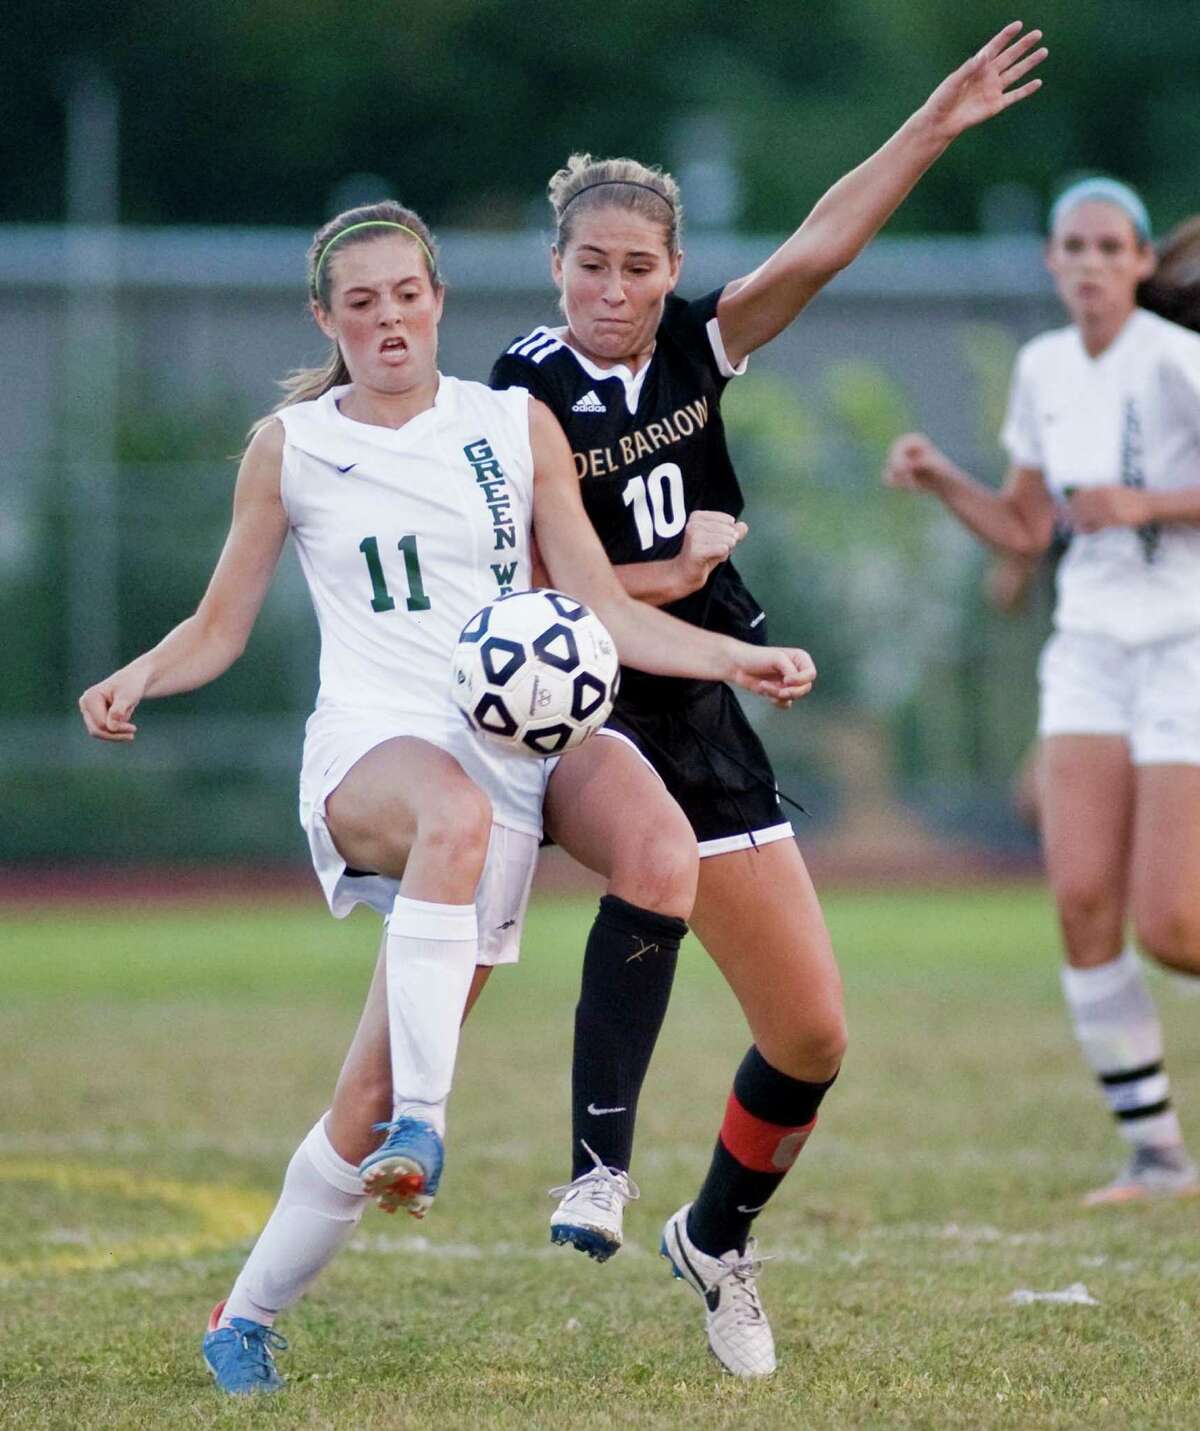 New Milford High School's Hannah Tower and Joel Barlow High School's Amelia Blackwell try and take control of the ball during a game at New Milford High School. Monday, Sept. 21, 2015